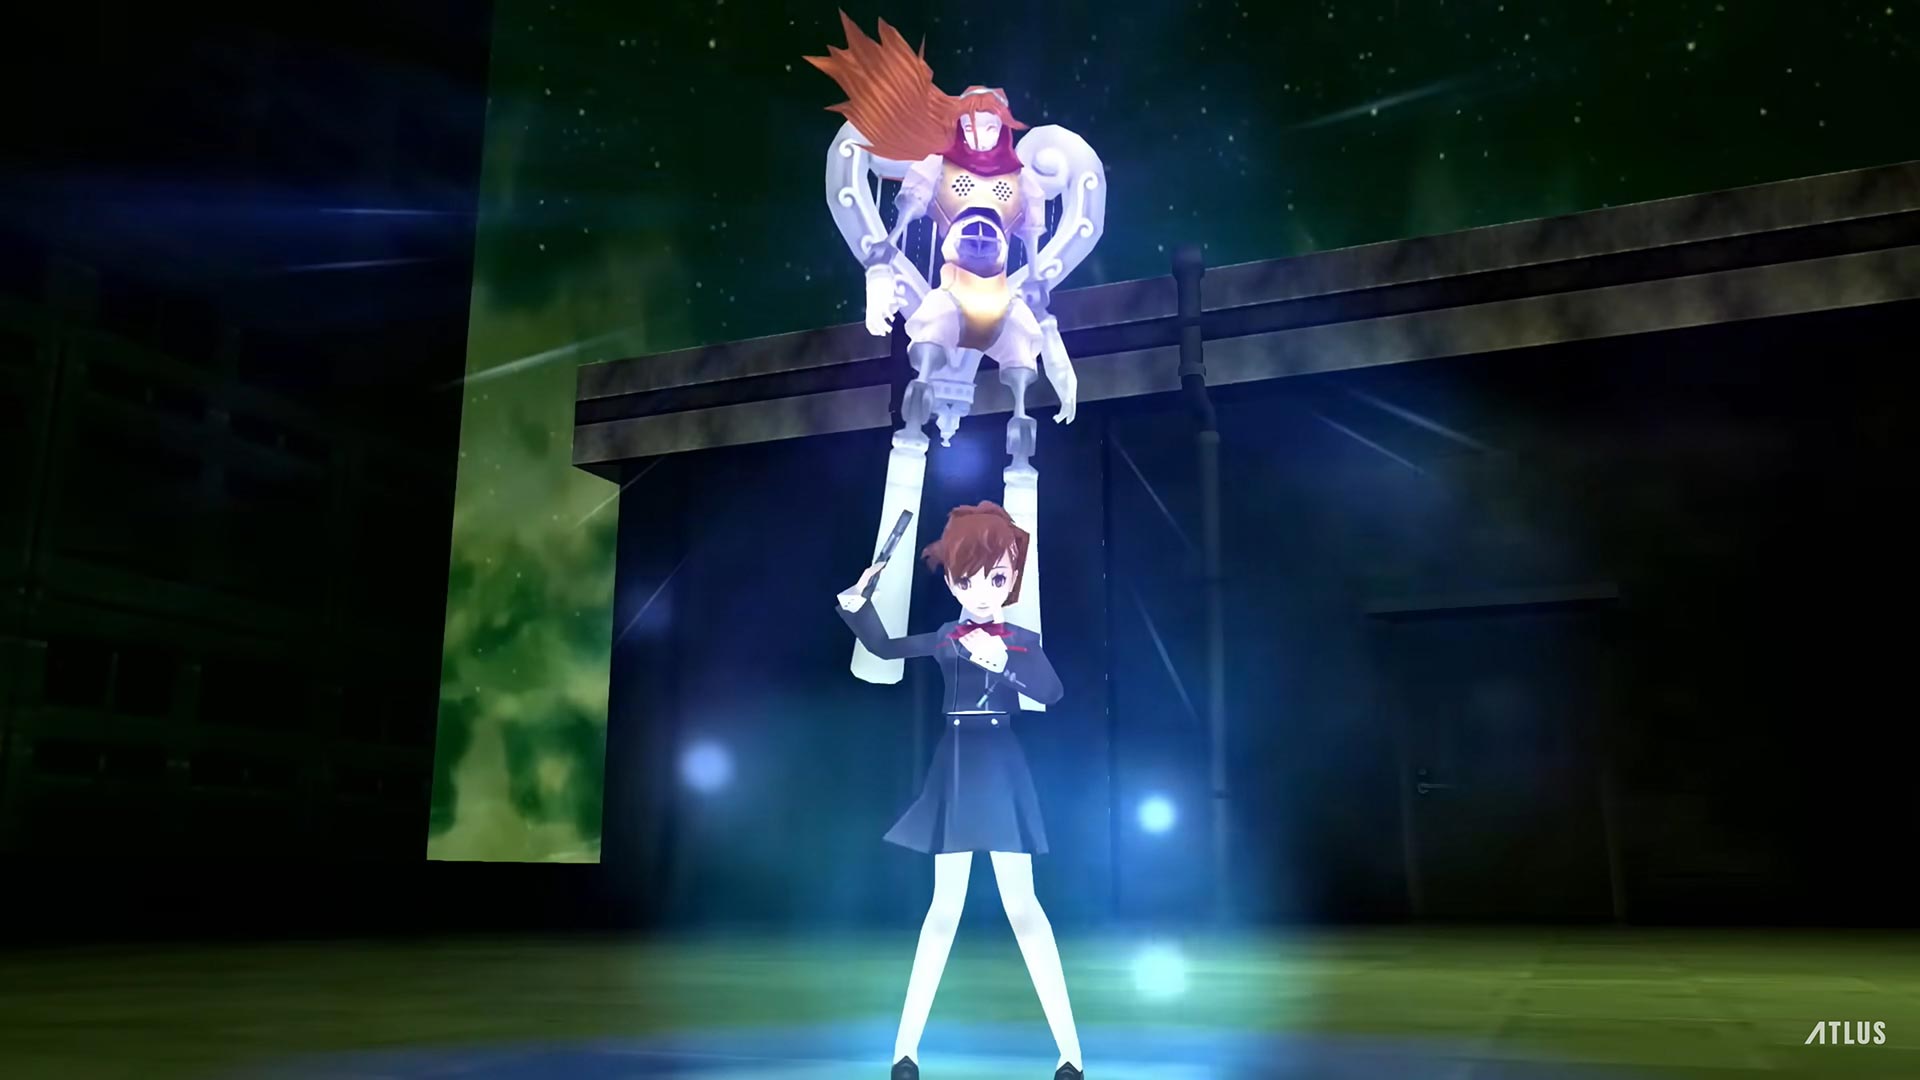 Protagonist of Persona 3 summoning a monster.